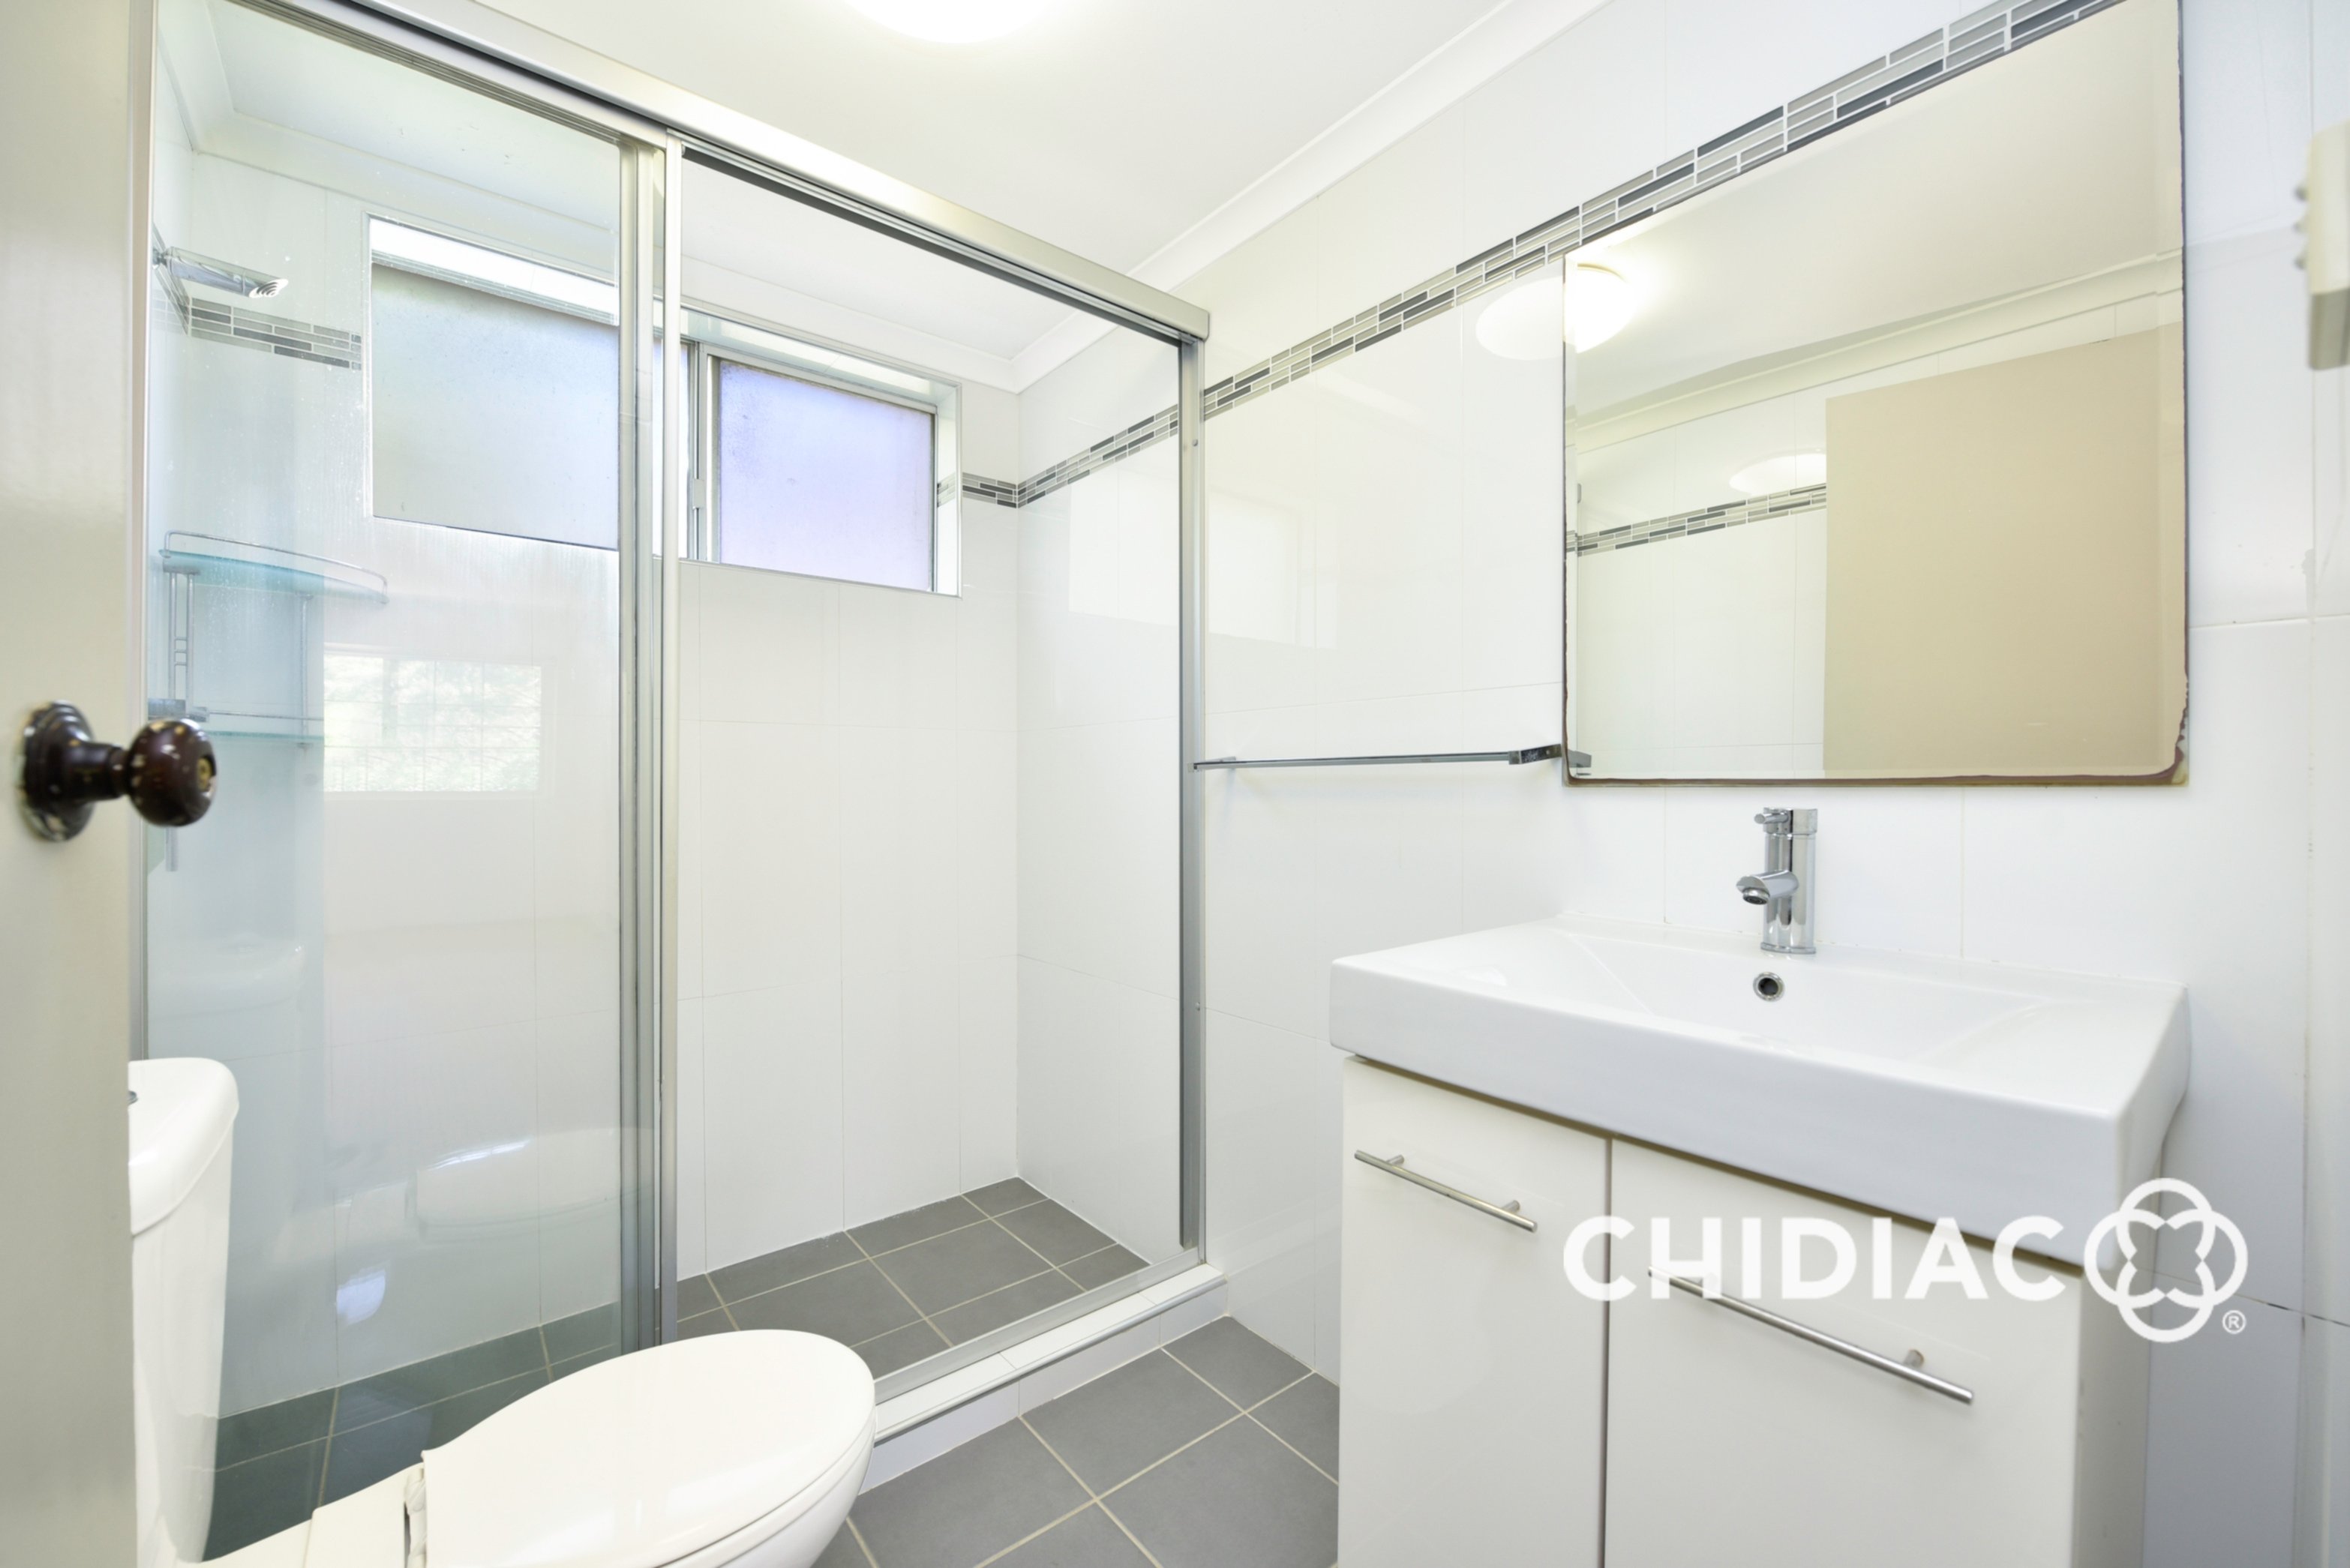 43/2 Leisure Close, Macquarie Park Leased by Chidiac Realty - image 4